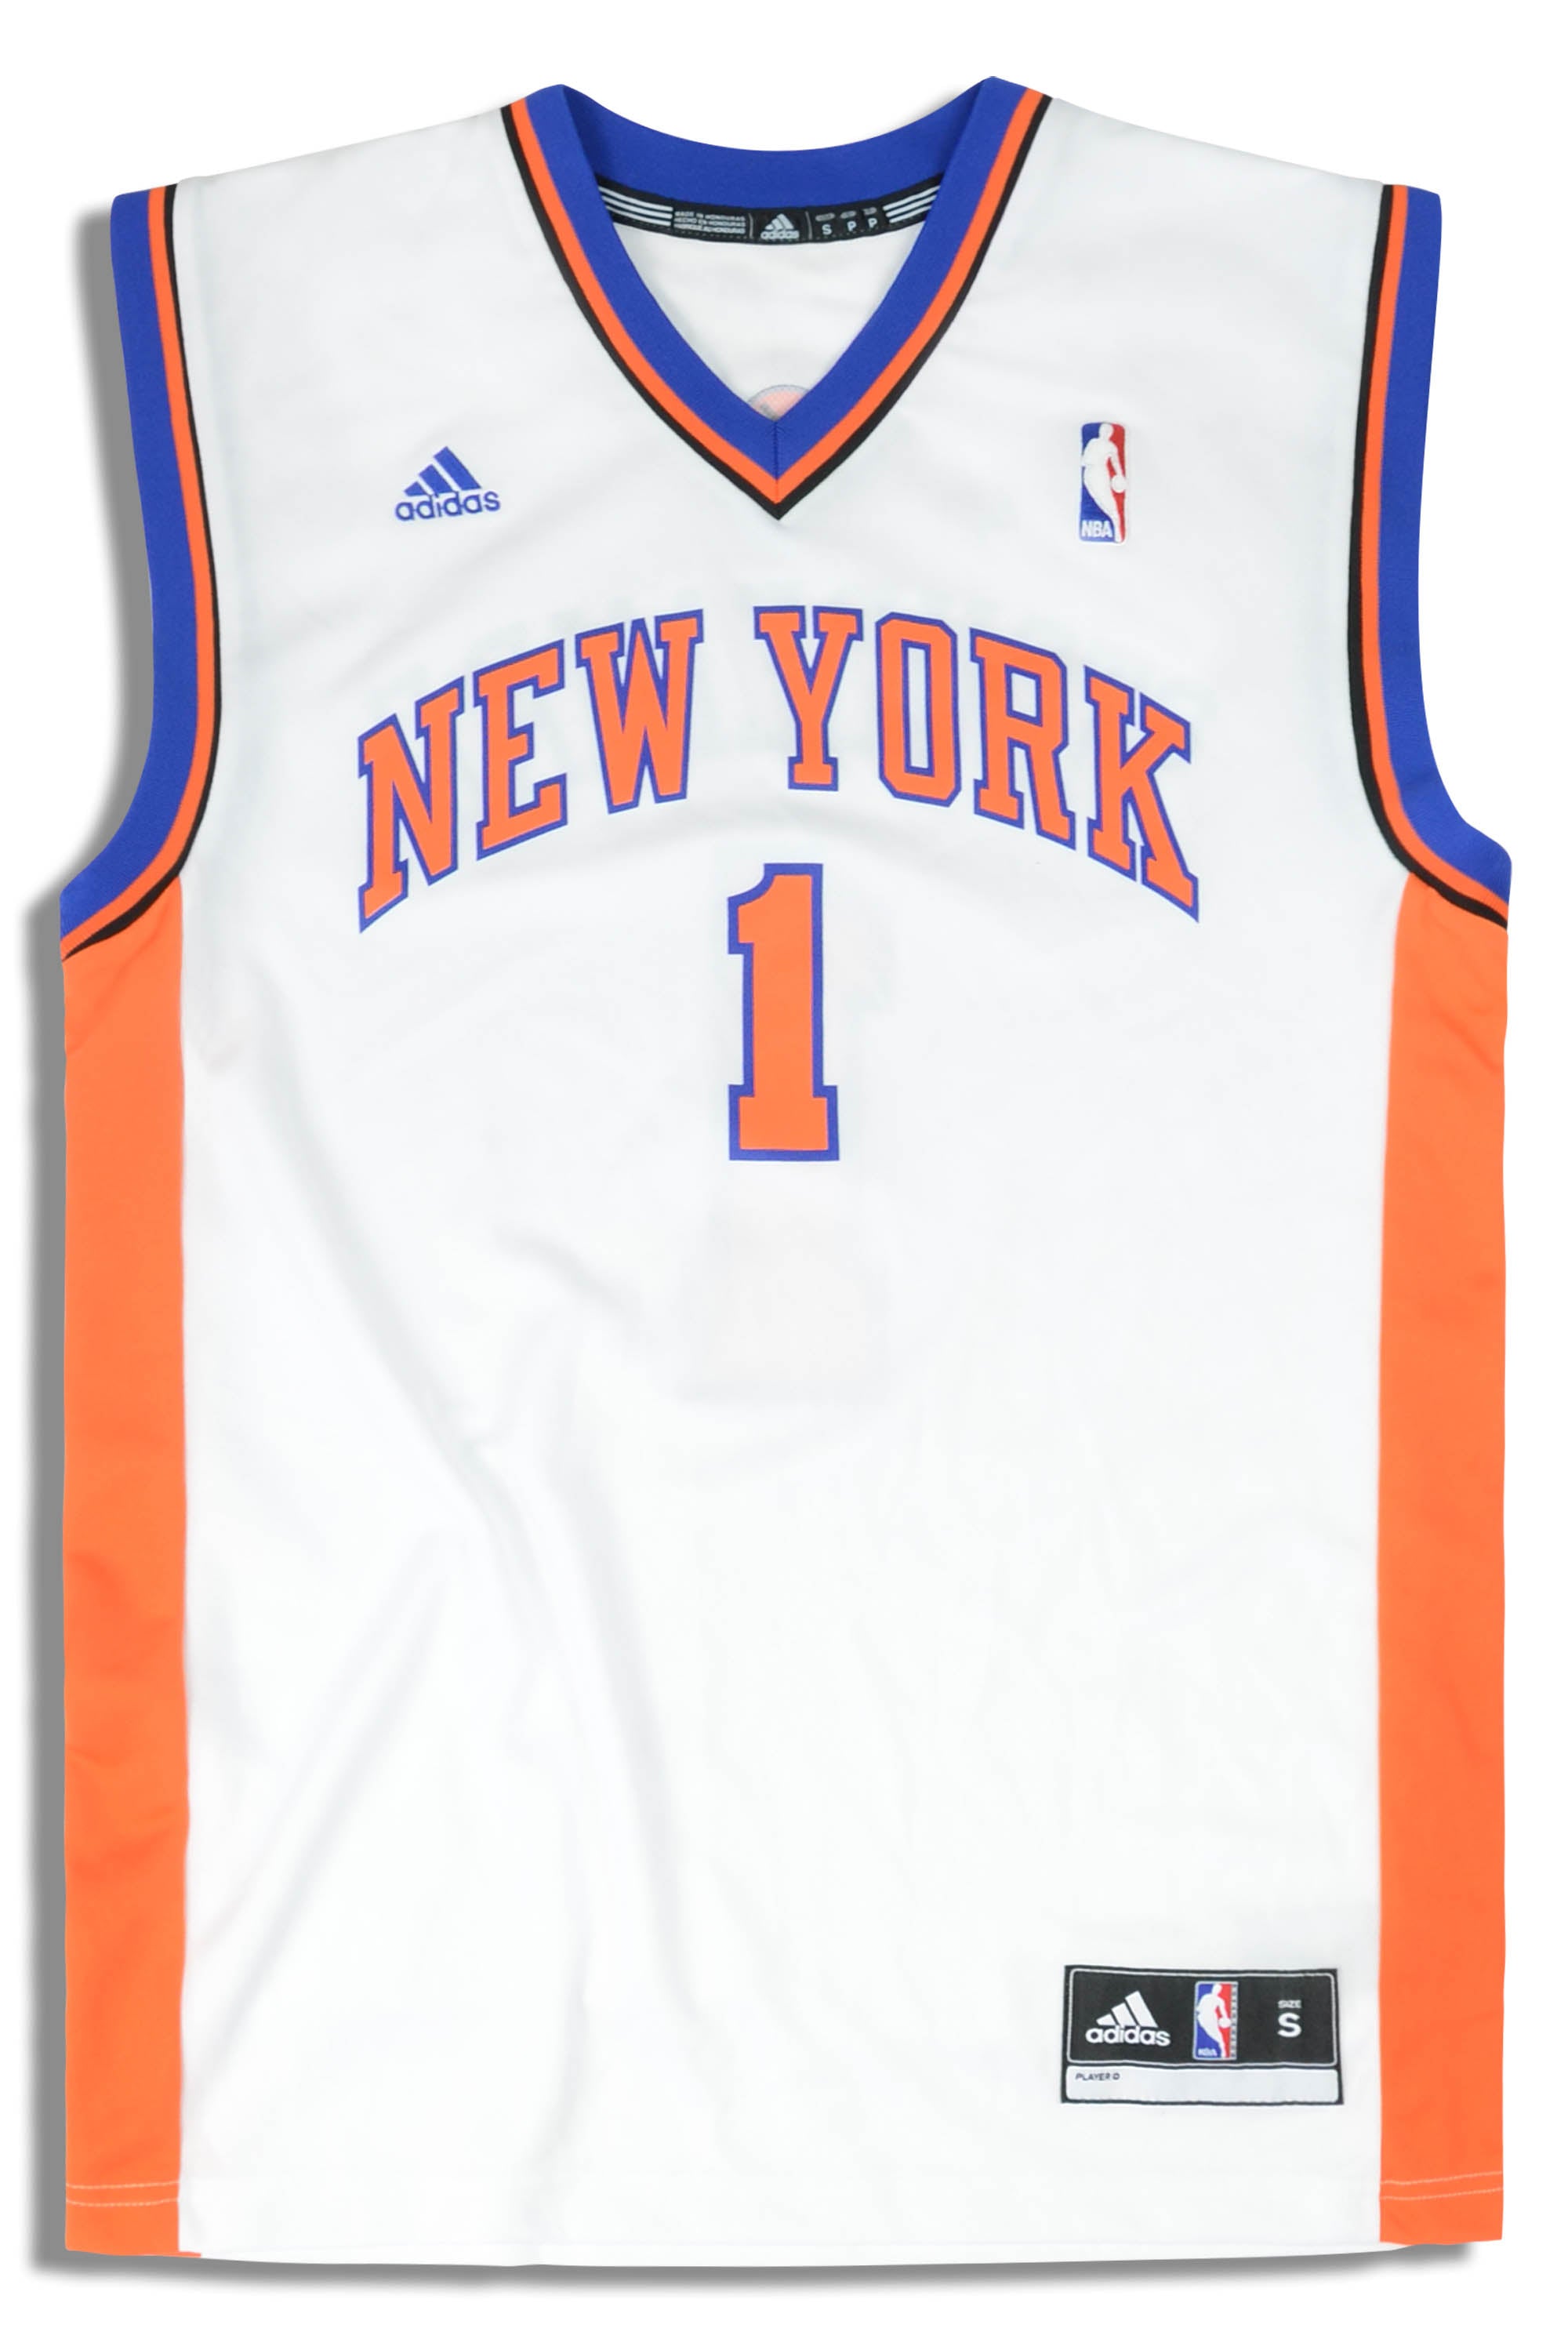 2010-12 NEW YORK KNICKS STOUDEMIRE #1 ADIDAS JERSEY (HOME) S